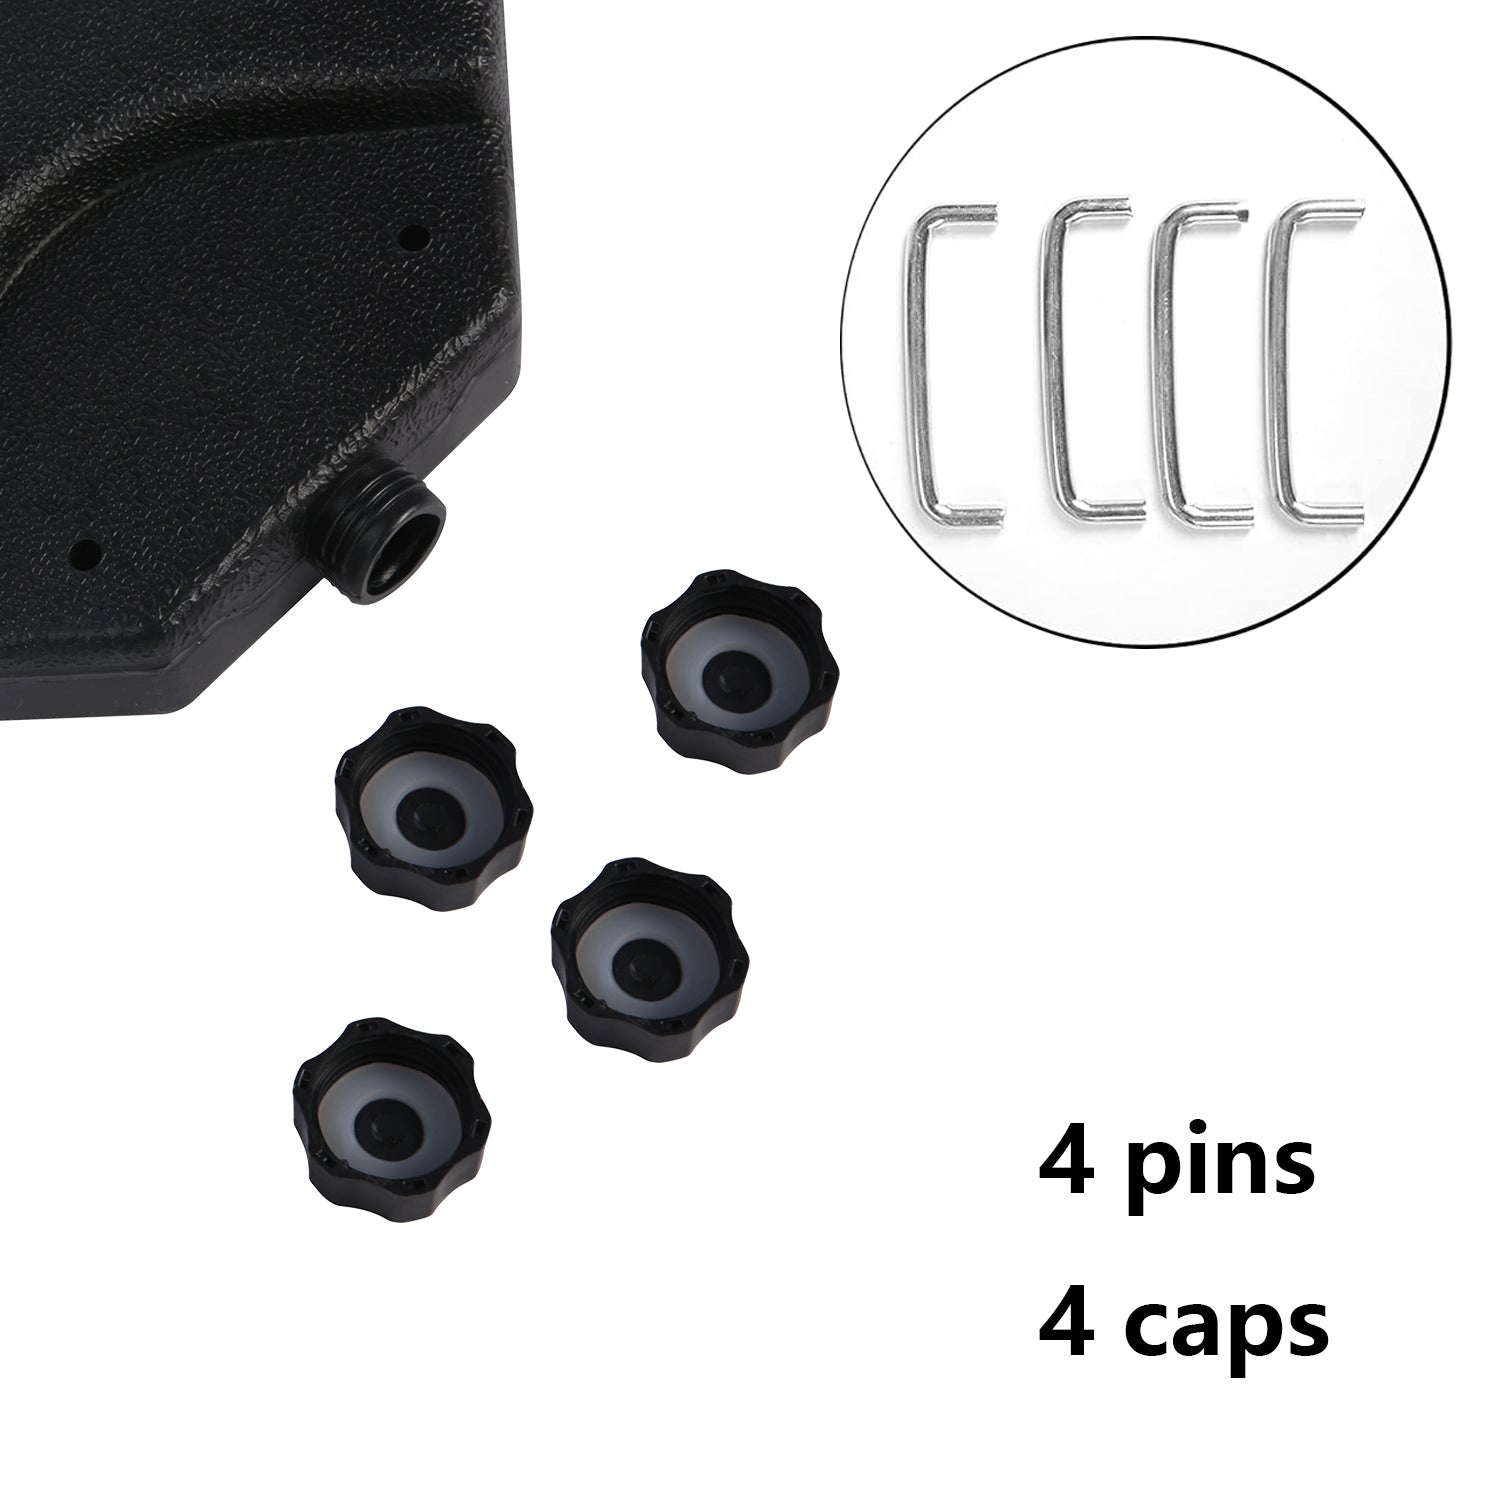 Pins and Caps for KM3890 Patio Umbrella Stand